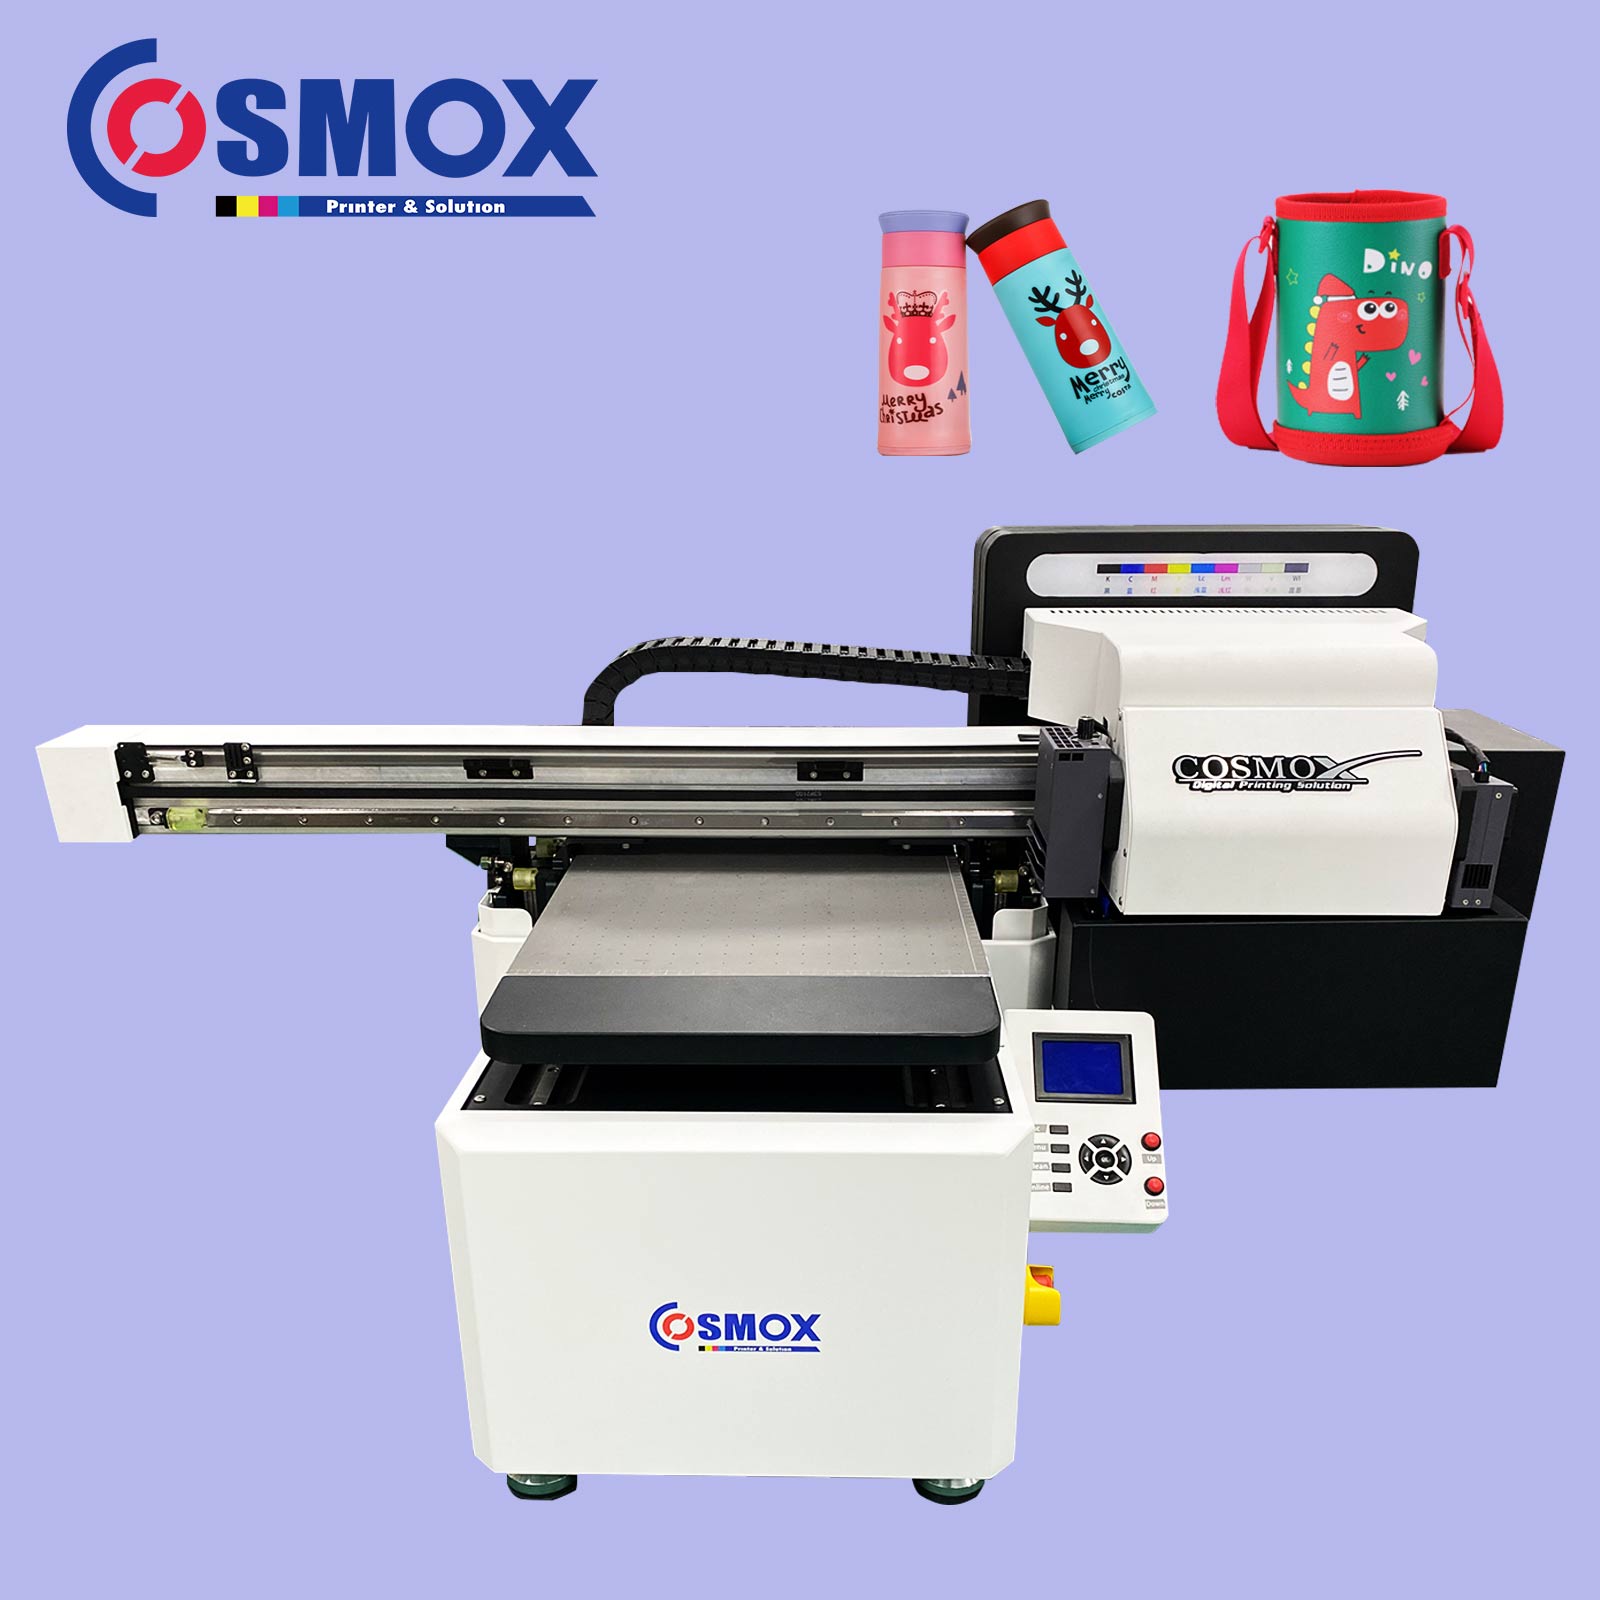 Ovsuqu A3 UV Printer R1390 UV Printer Flatbed with Rotary axis T-Shirt  fixrture for Wood, Fabrics,Leather, Bottle,Metal,Golf, Phone case and More